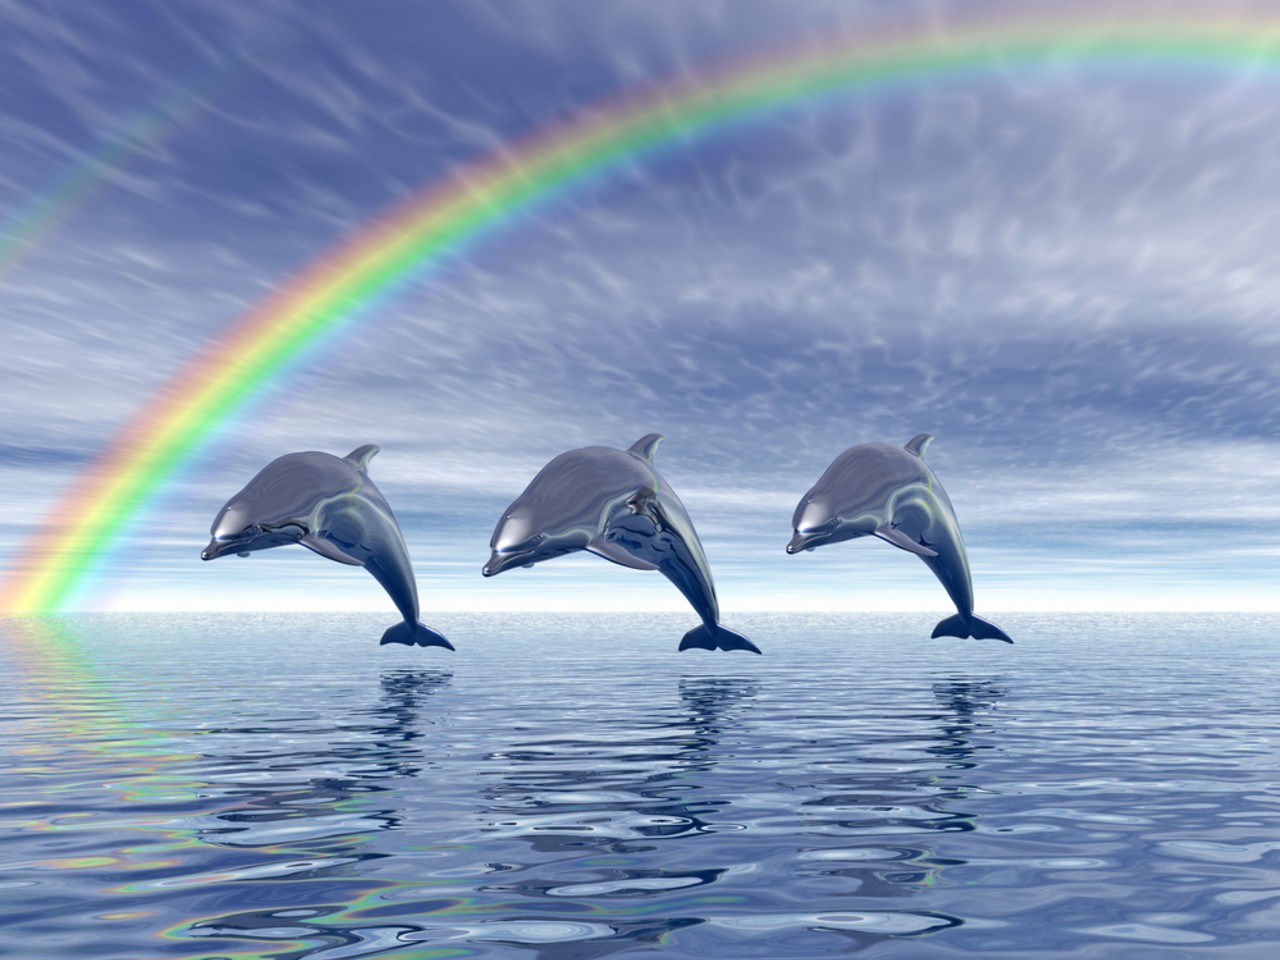 the two dolphins swim across the water under a rainbow